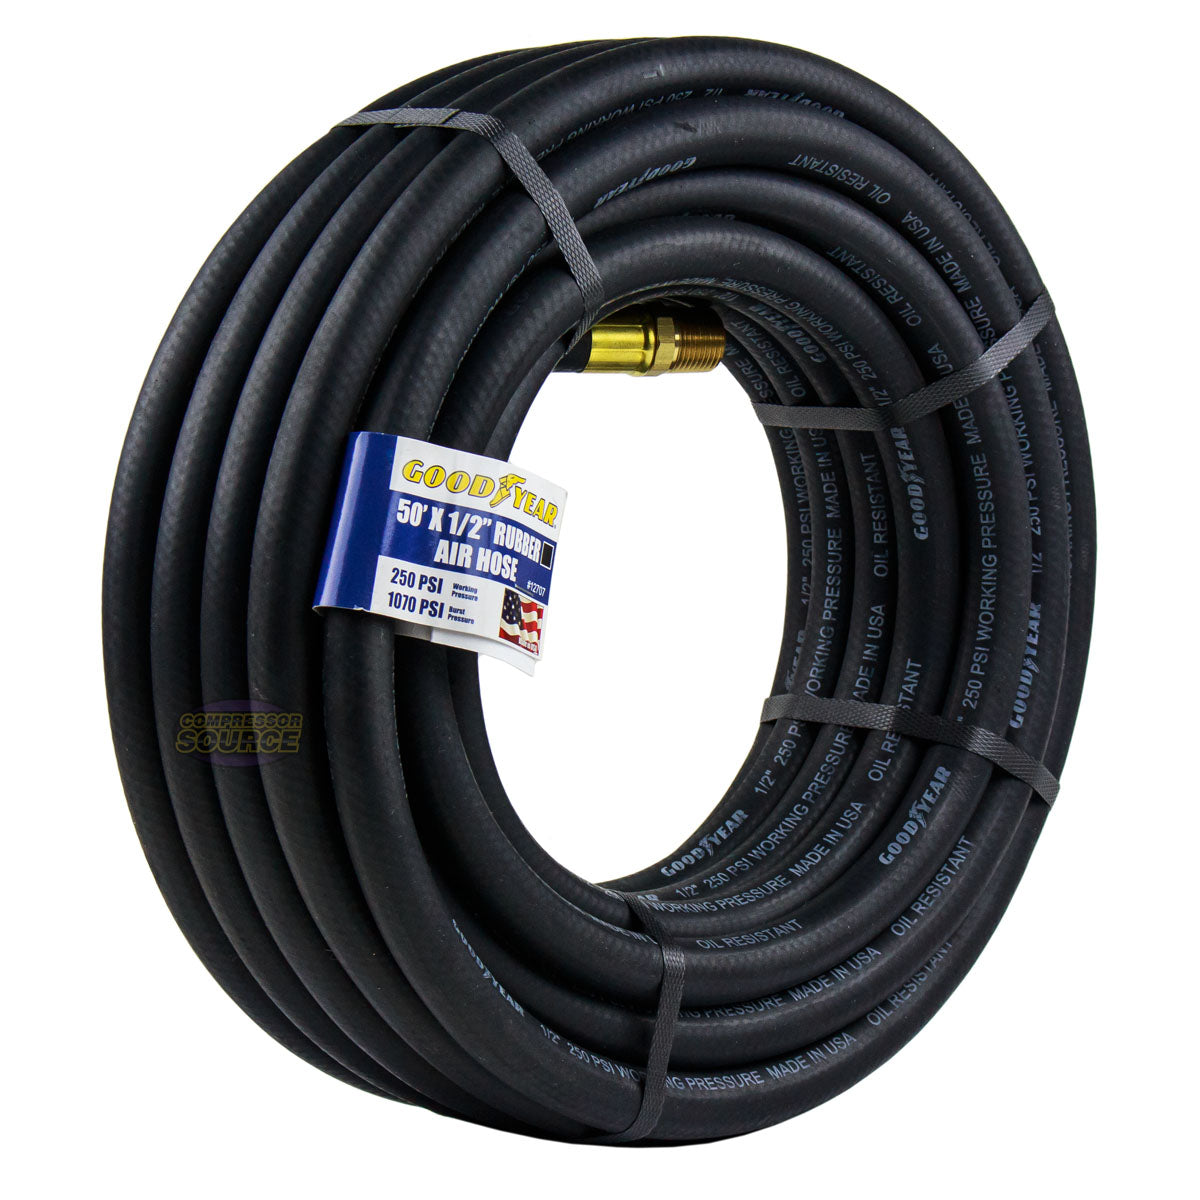 Goodyear 50' ft. x 1/2" in. Rubber Air Hose 250 PSI Air Compressor Hose 12707